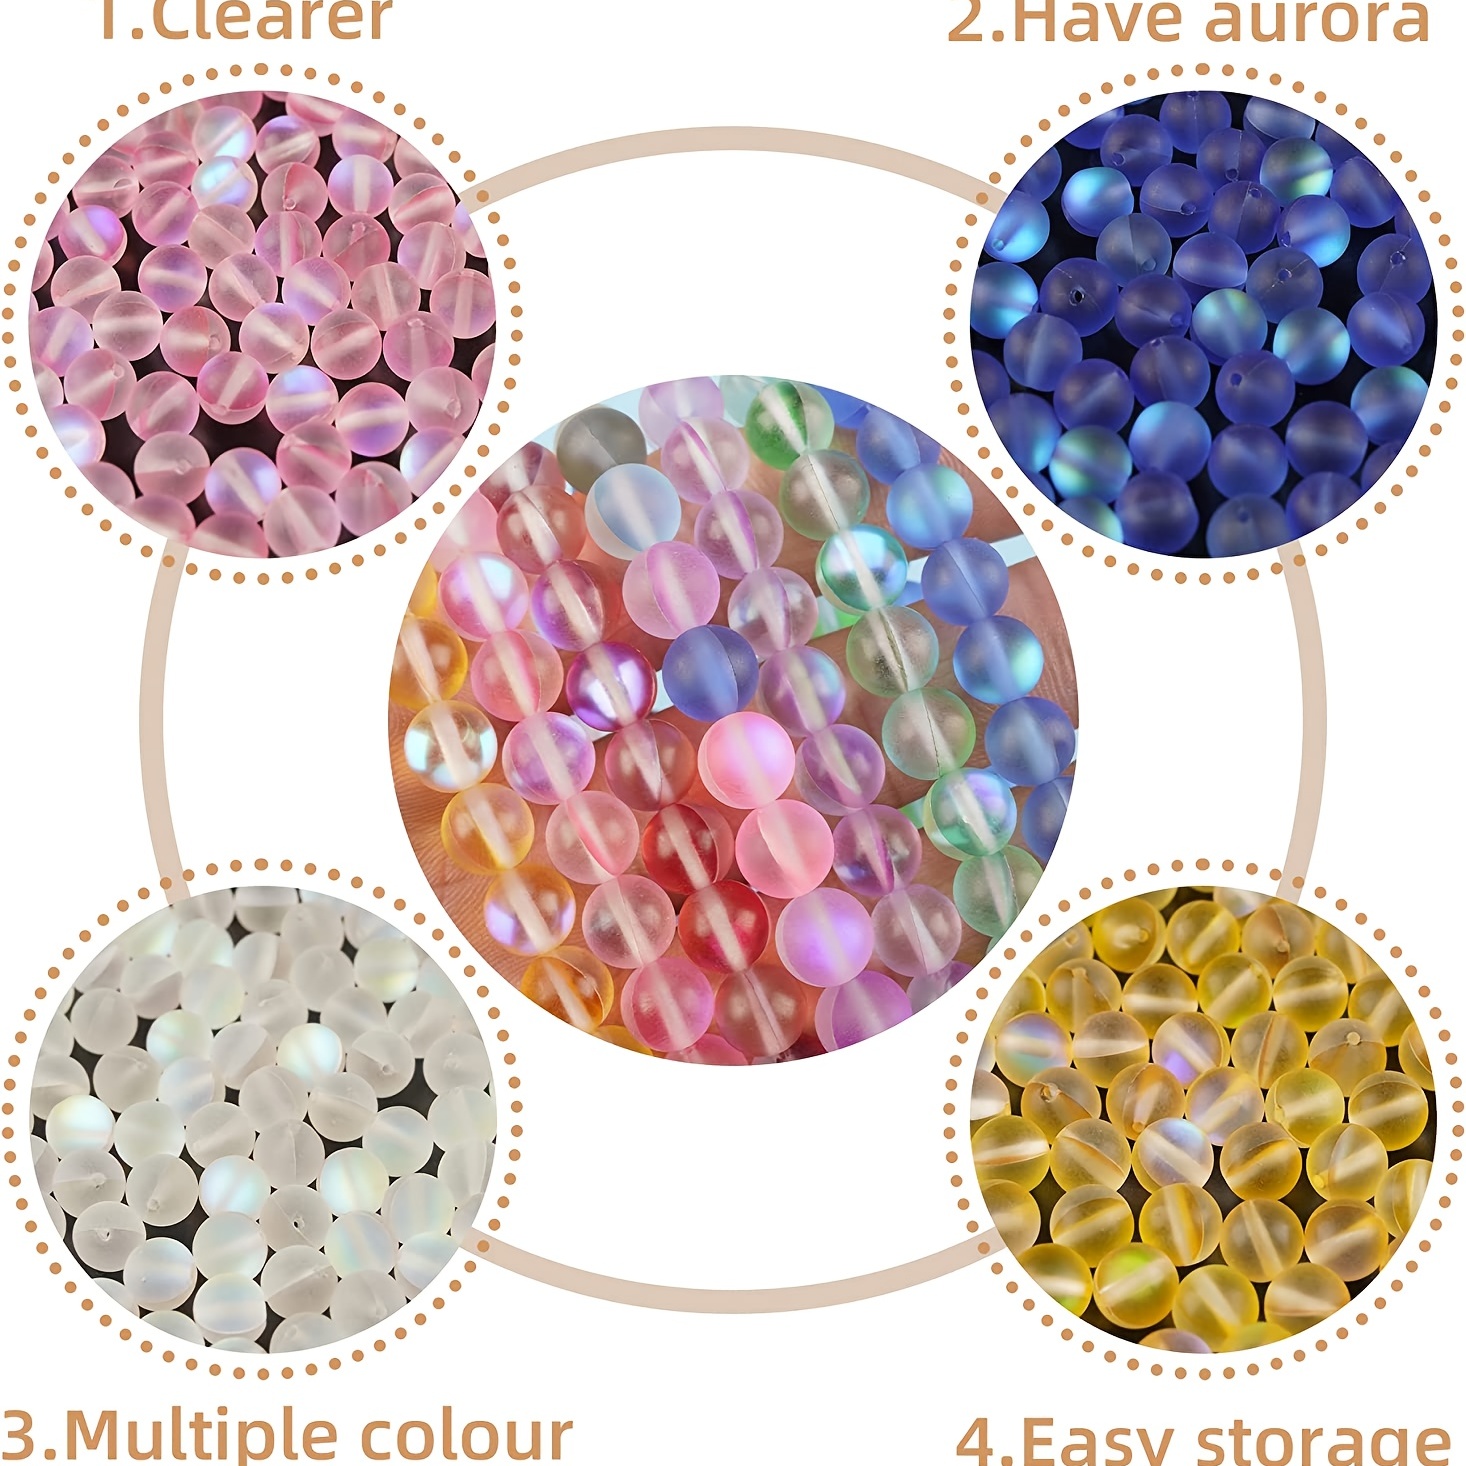 Yaomiao 140 Pcs 8 mm Mermaid Glass Beads Bulk Matte Crystal Glass Beads  Glass Frosted Moonstone Beads for Jewelry Making Crafts DIY, Mul